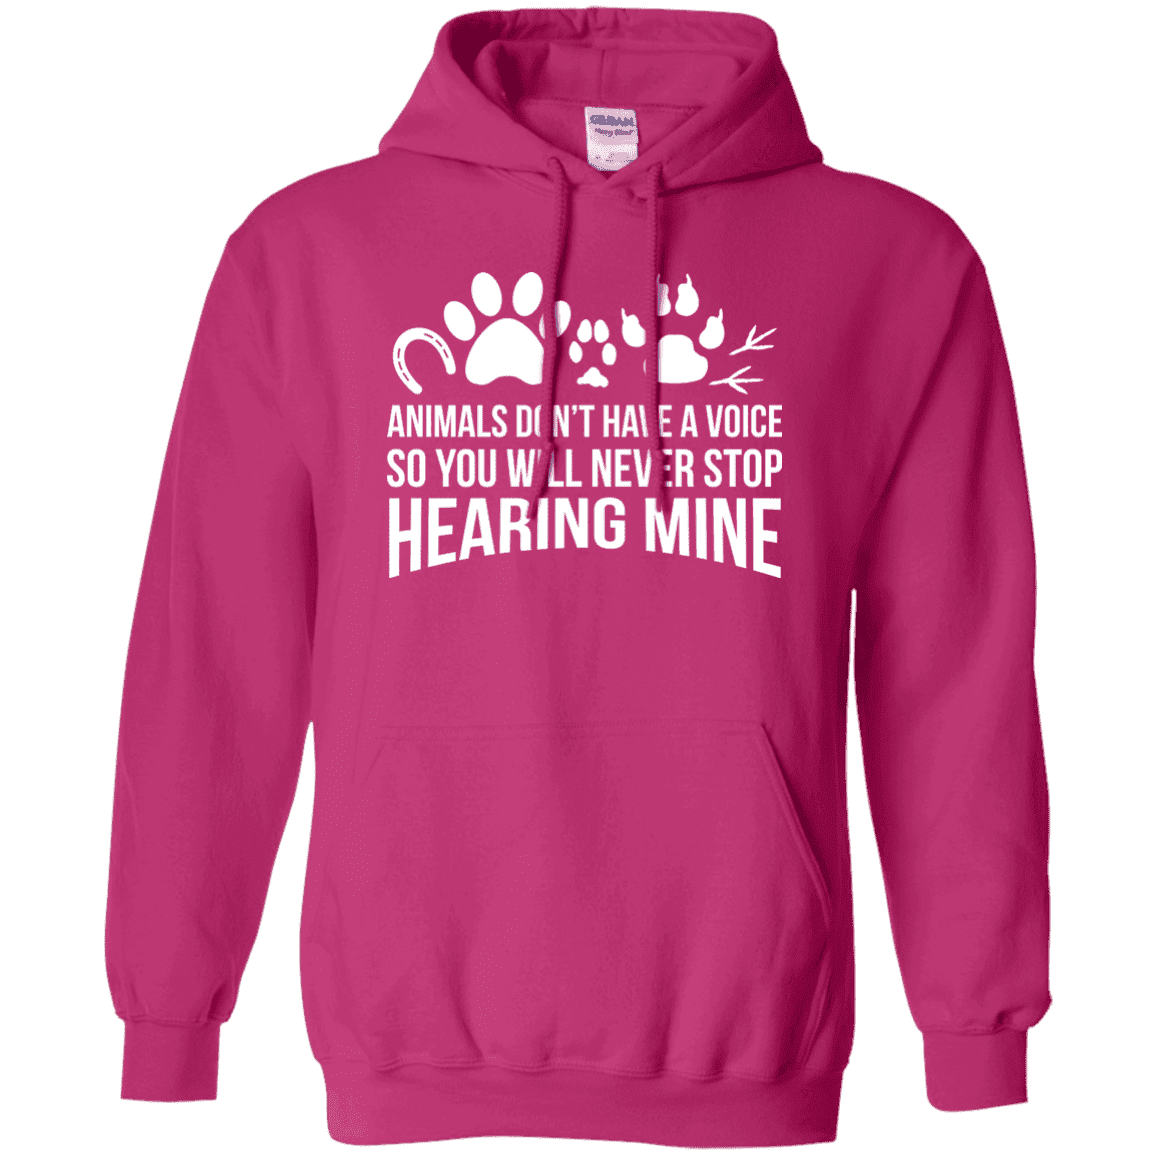 Animals Don't Have A Voice - Hoodie.